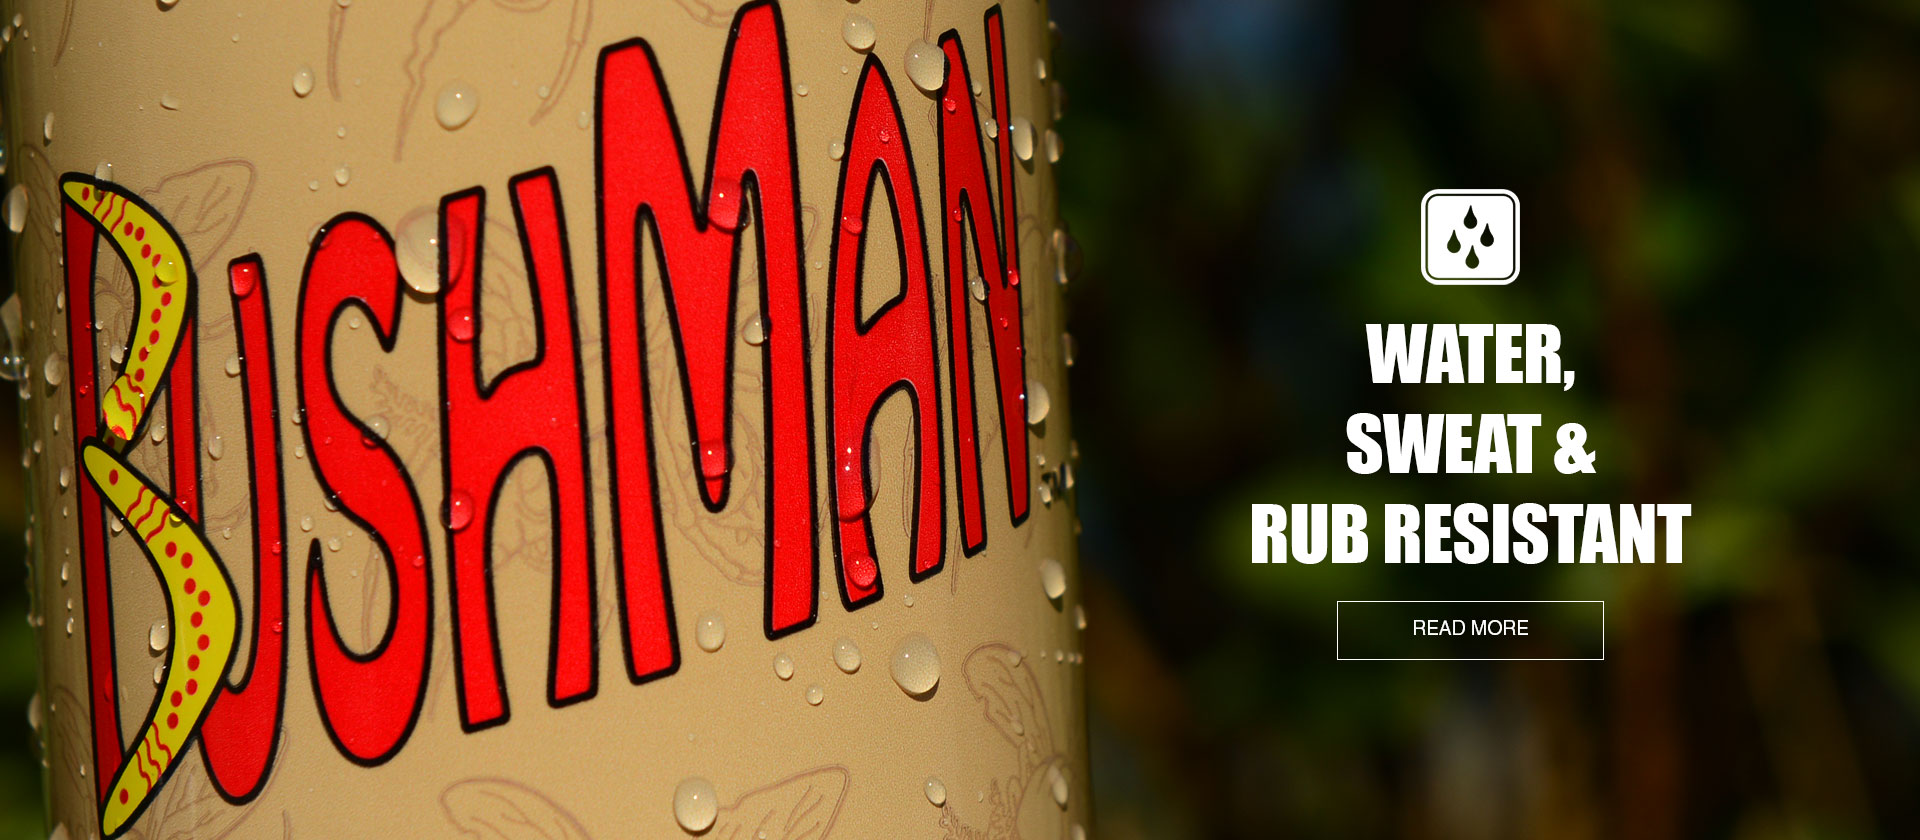 Bushman is water, sweat and rub resistant